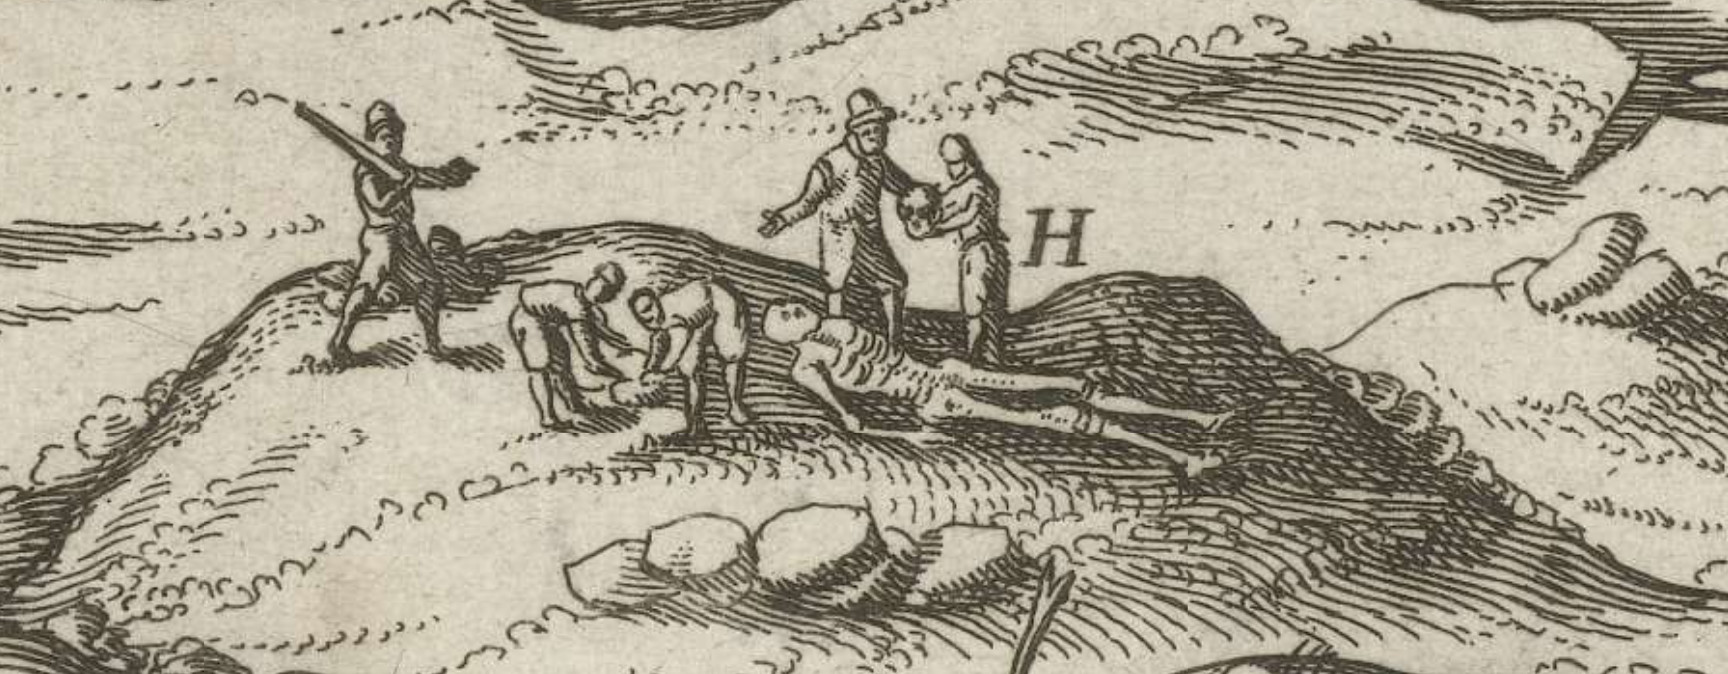 From Mirror of the Australian Navigation by Jacob le Maire, 1622